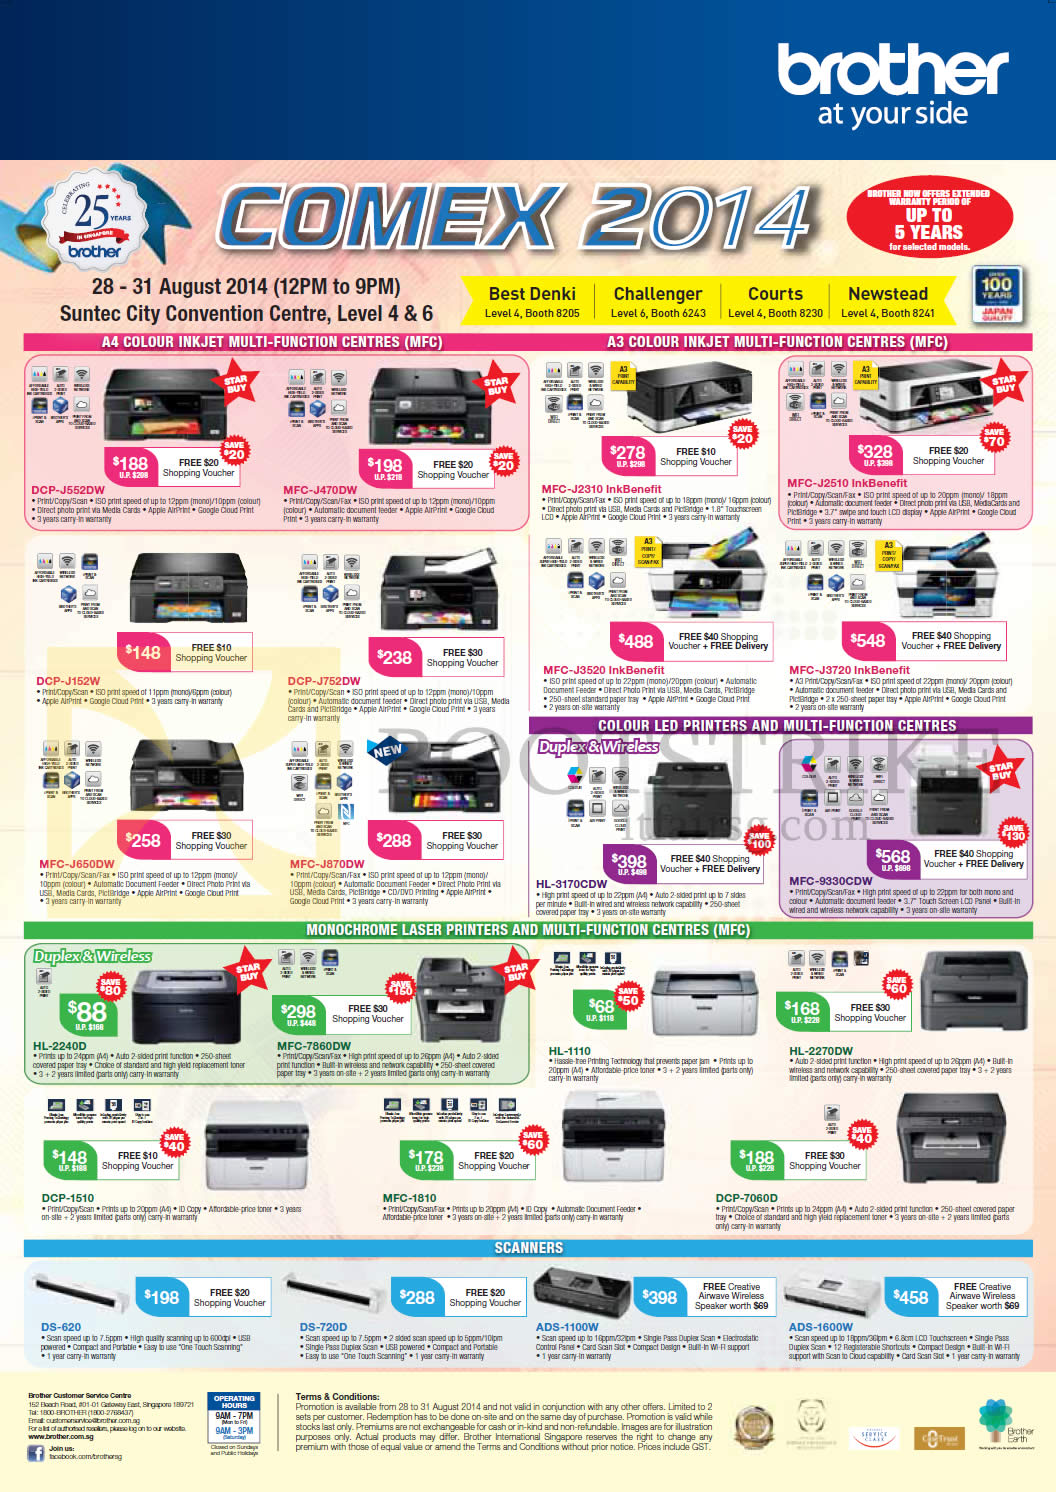 COMEX 2014 price list image brochure of Brother Printers Scanners, DCP-J552DW J152DW J752DW 1510 7060D, MFC-J470DW J2310 J2510 J3520 J3720, HL-2240D 1110,2270DW, DS-620 720D, ADS-1100W 1600W